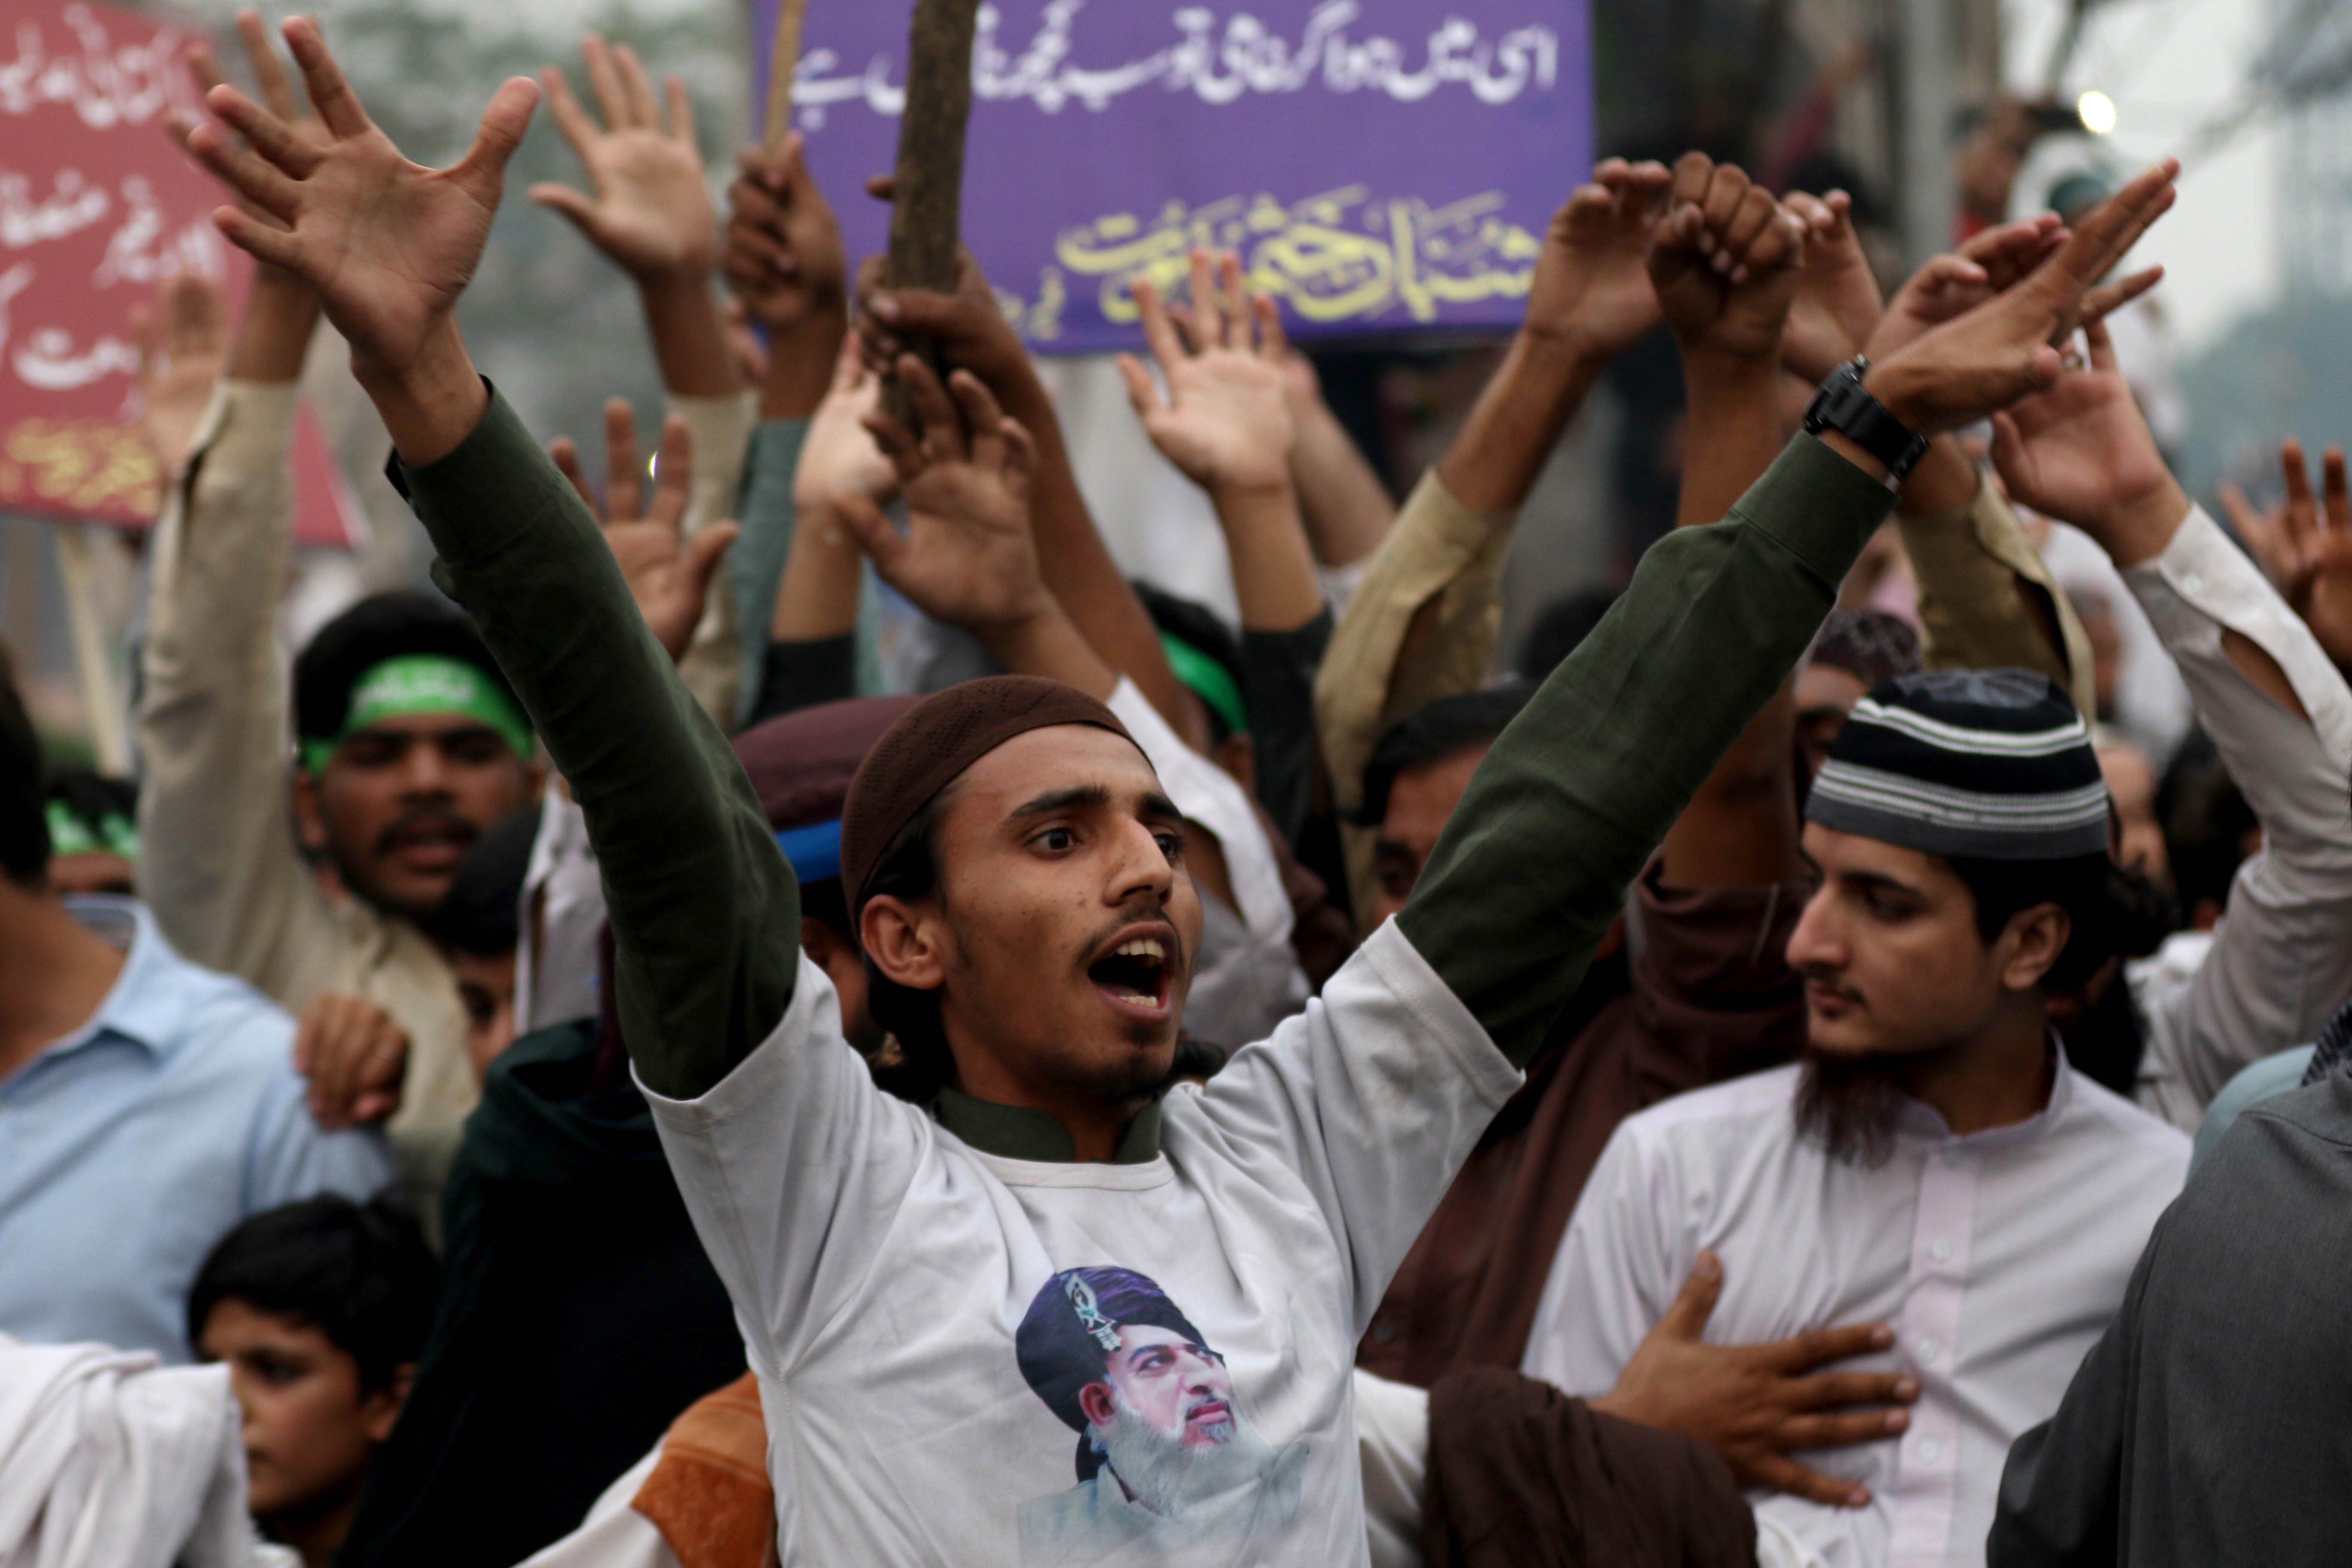 Supporters of the radical Tehreek-e-Labbaik Pakistan (TLP) party rally against the Pakistan Supreme Court’s acquittal of Asia Bibi, at a rally in Lahore last Friday, one of a number of protests that paralysed major cities. Photo: AP